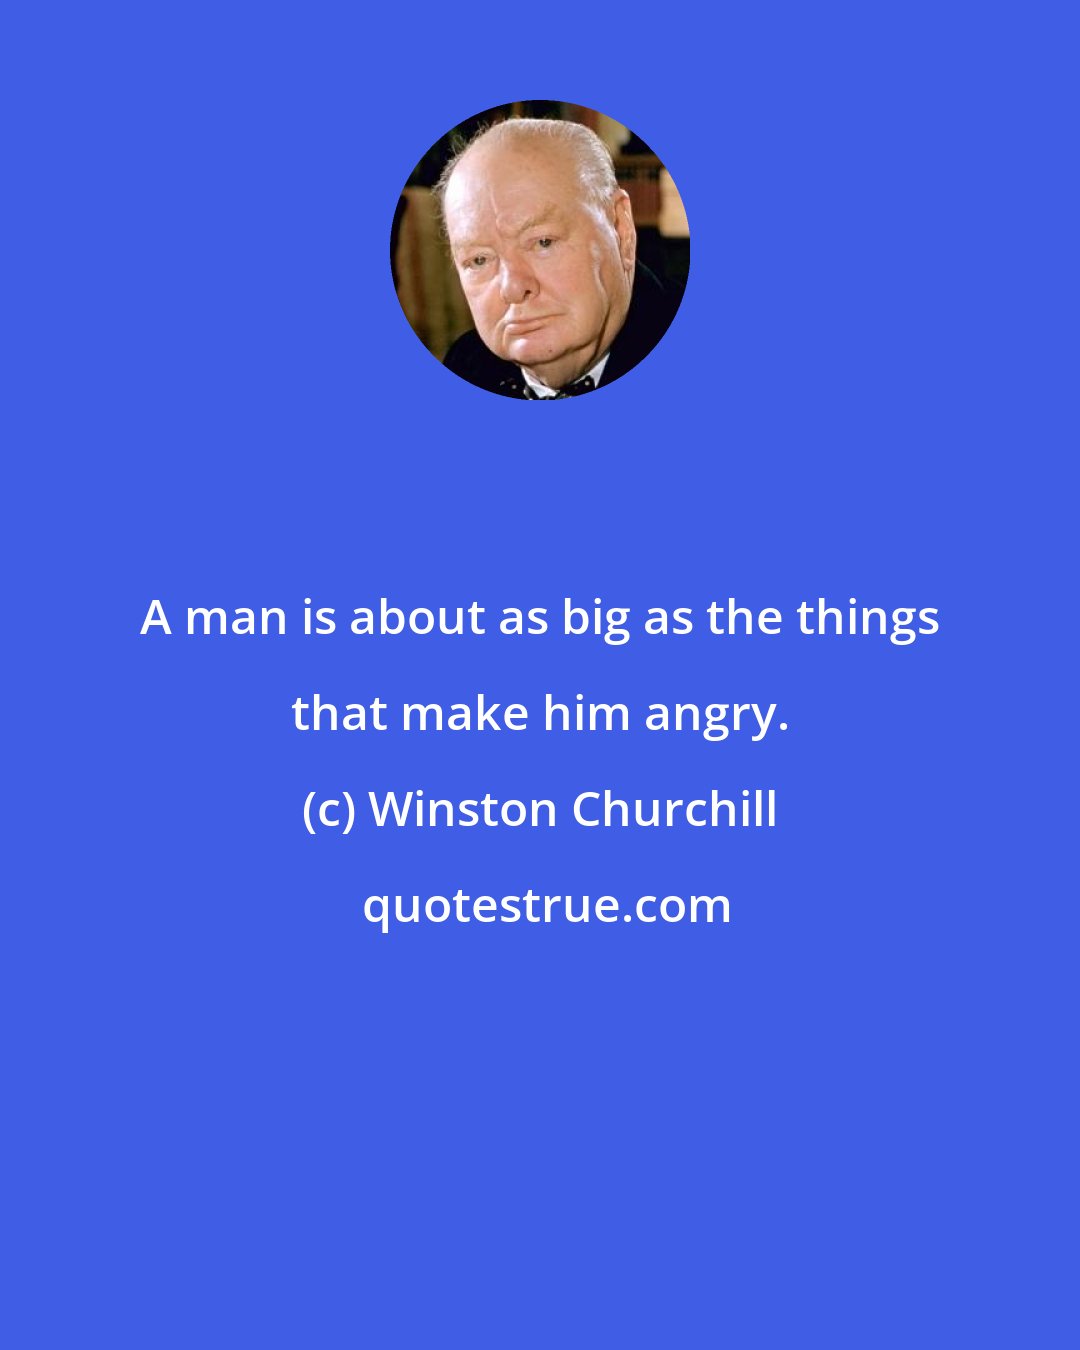 Winston Churchill: A man is about as big as the things that make him angry.